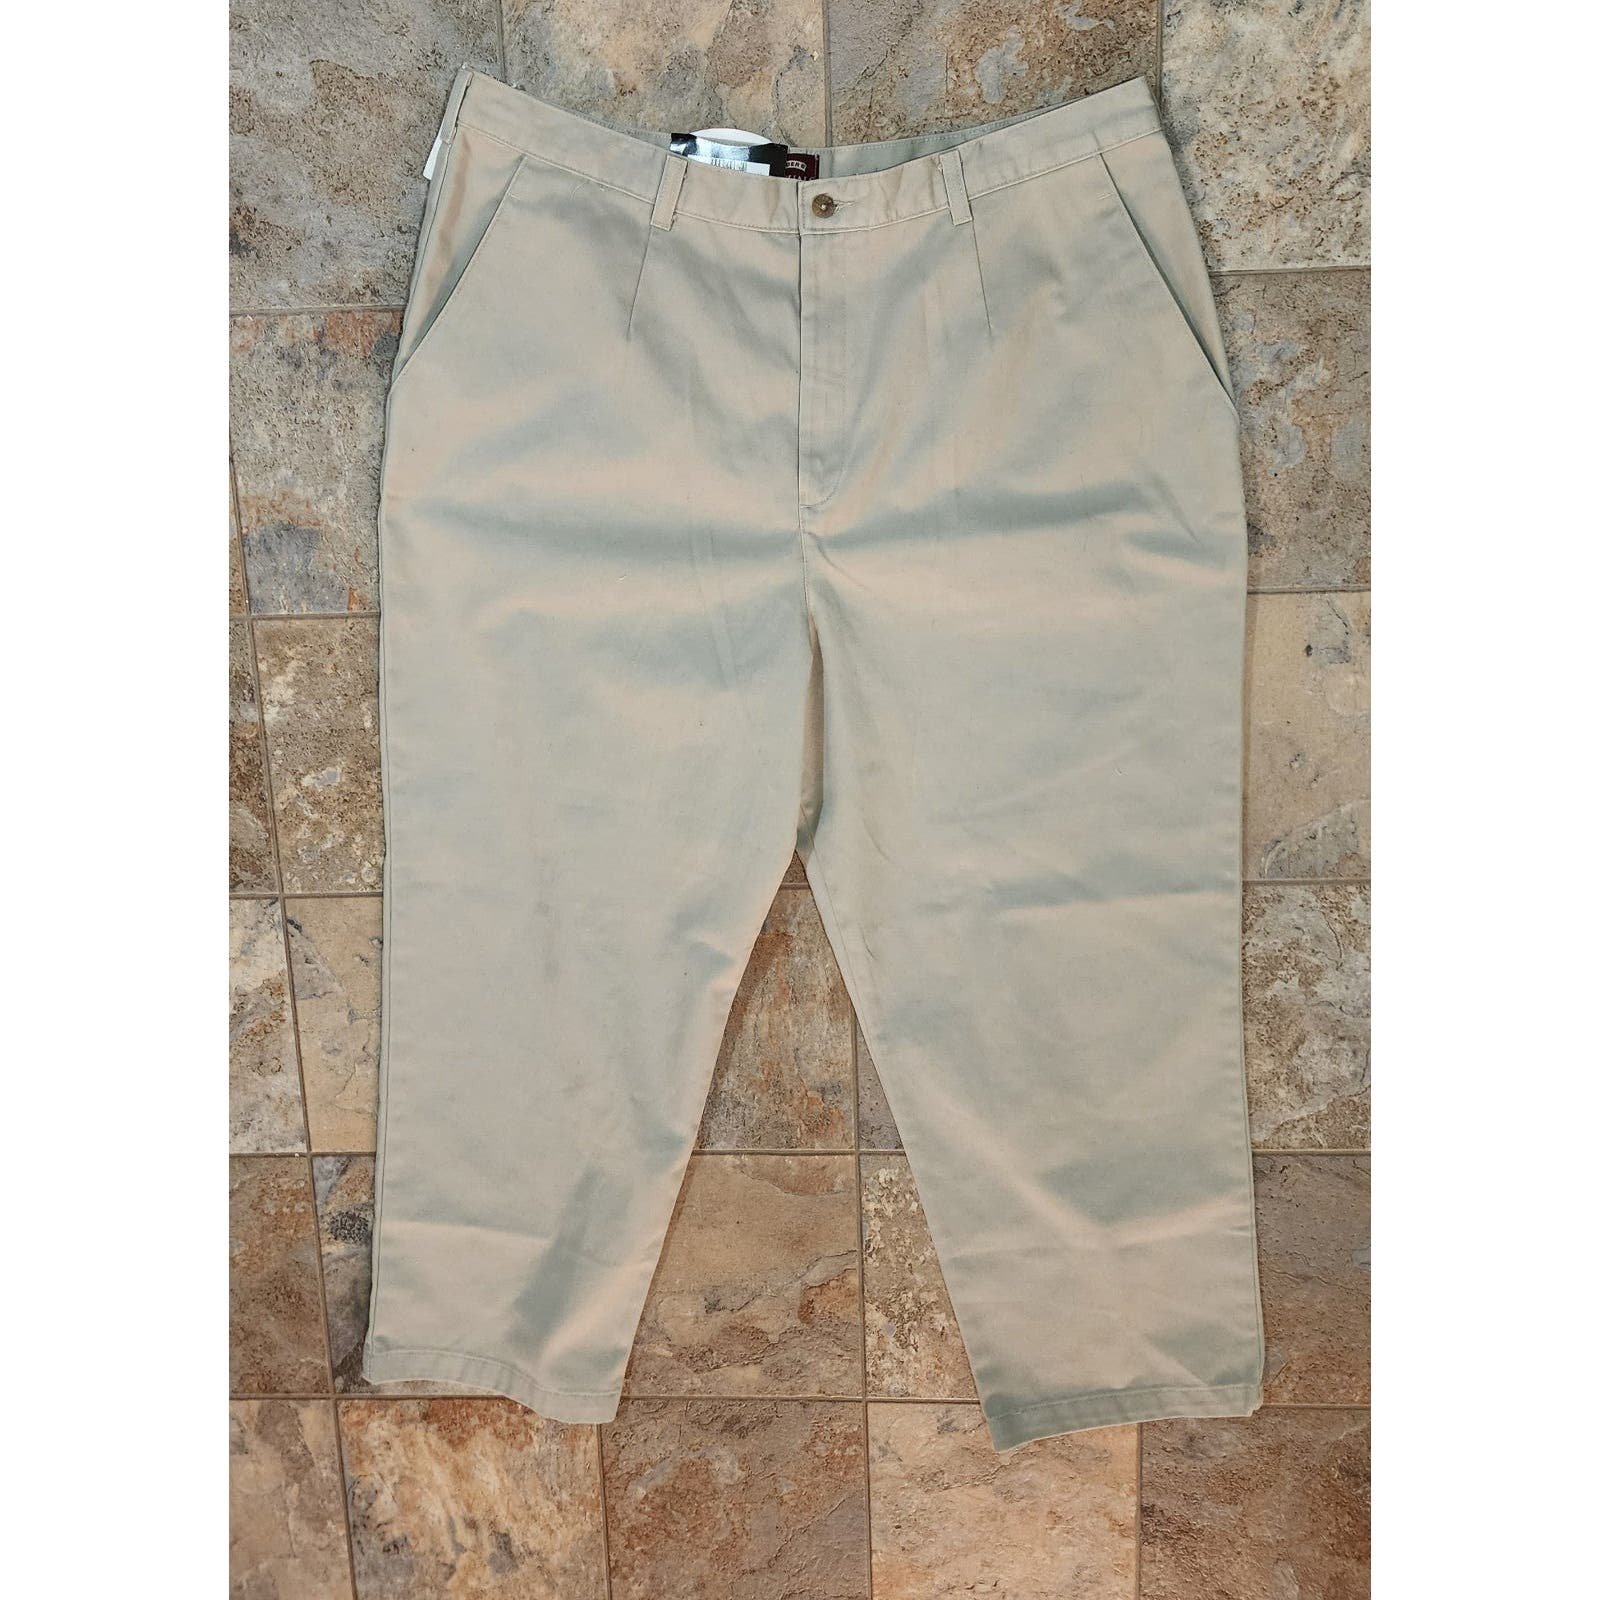 Fashion NWT Rider Relaxed Fit Twill Womens Trousers 2XL